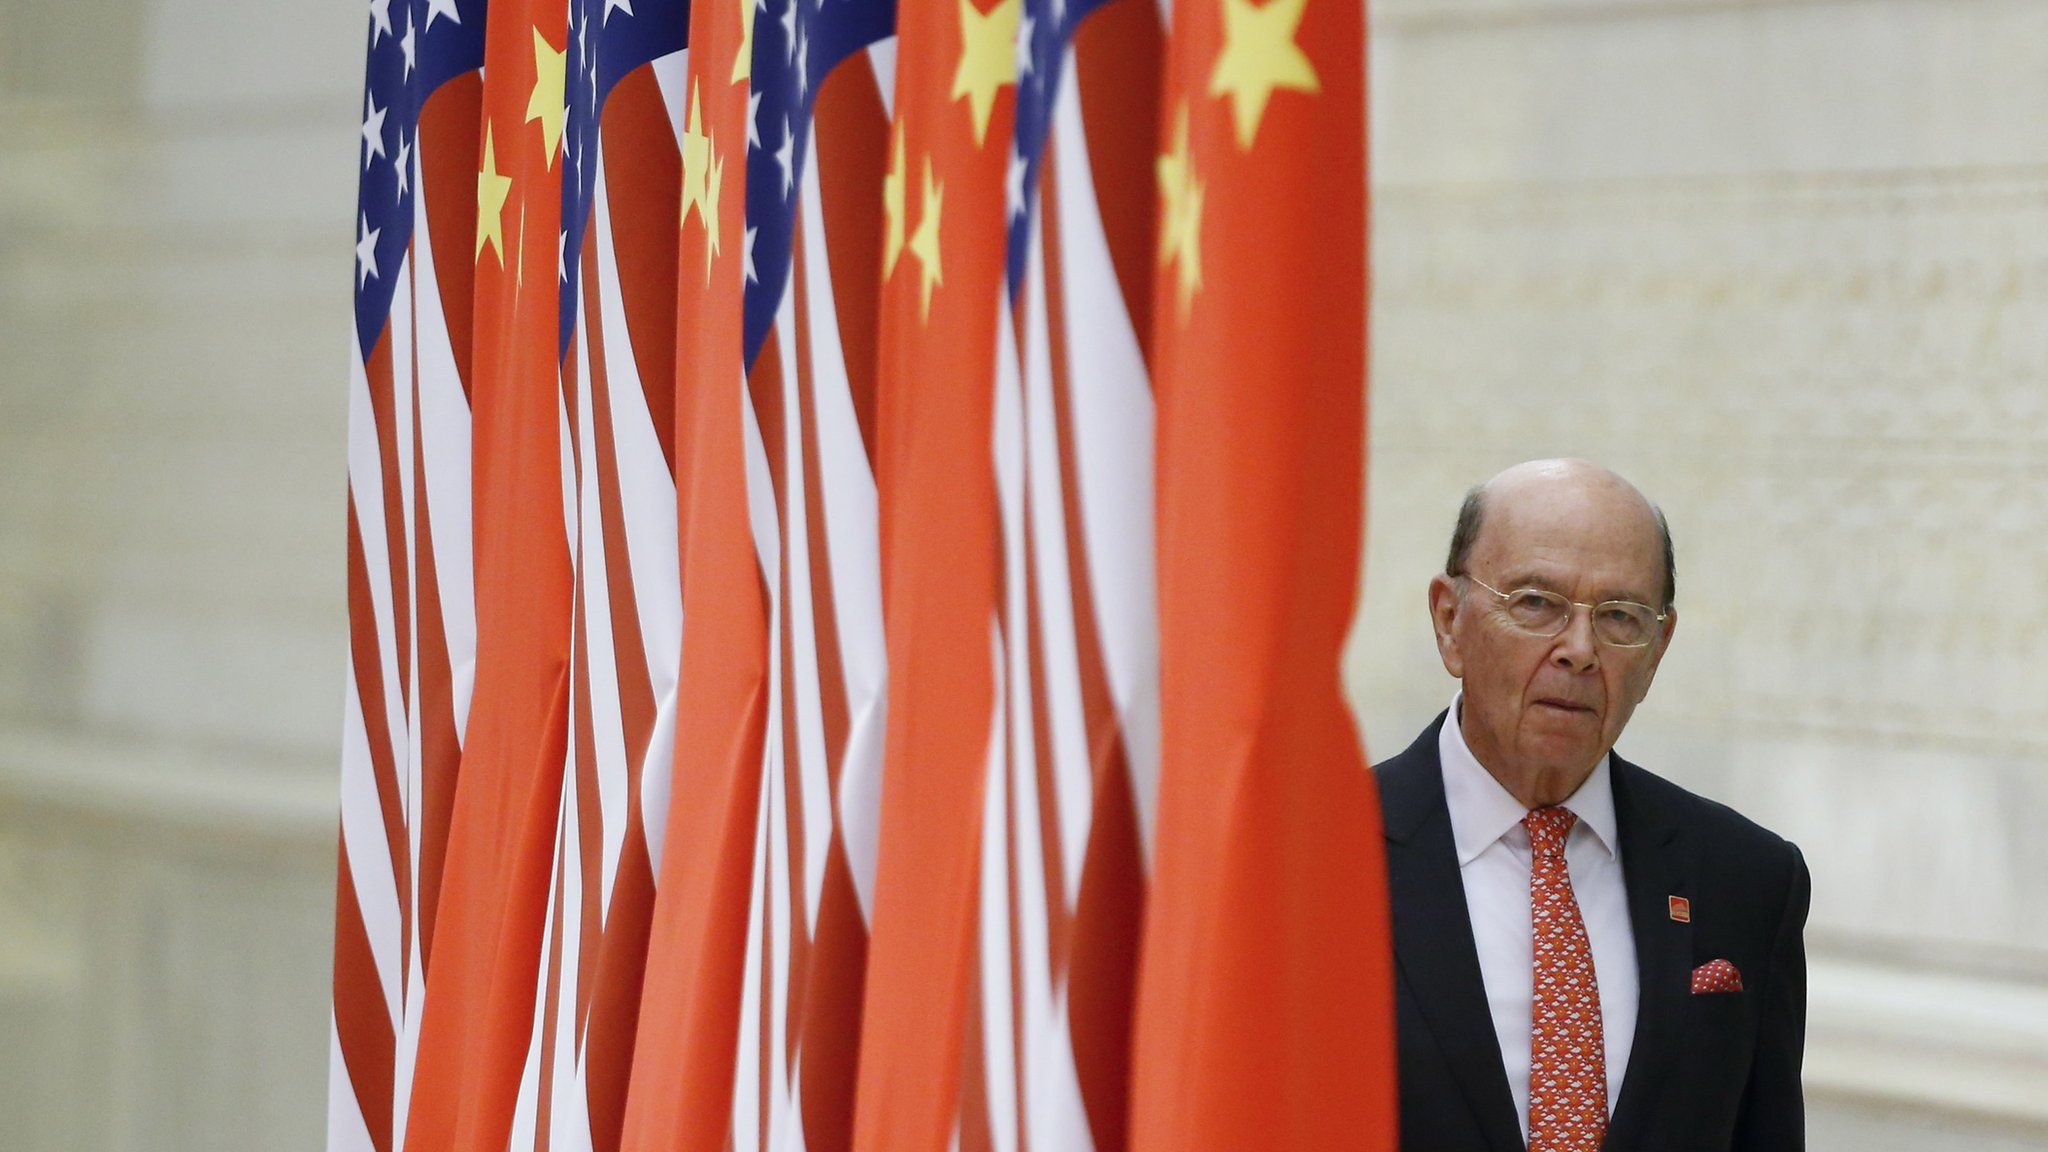 Commerce Secretary Wilbur Ross arrives at a state dinner at the Great Hall of the People on November 9, 2017 in Beijing, China